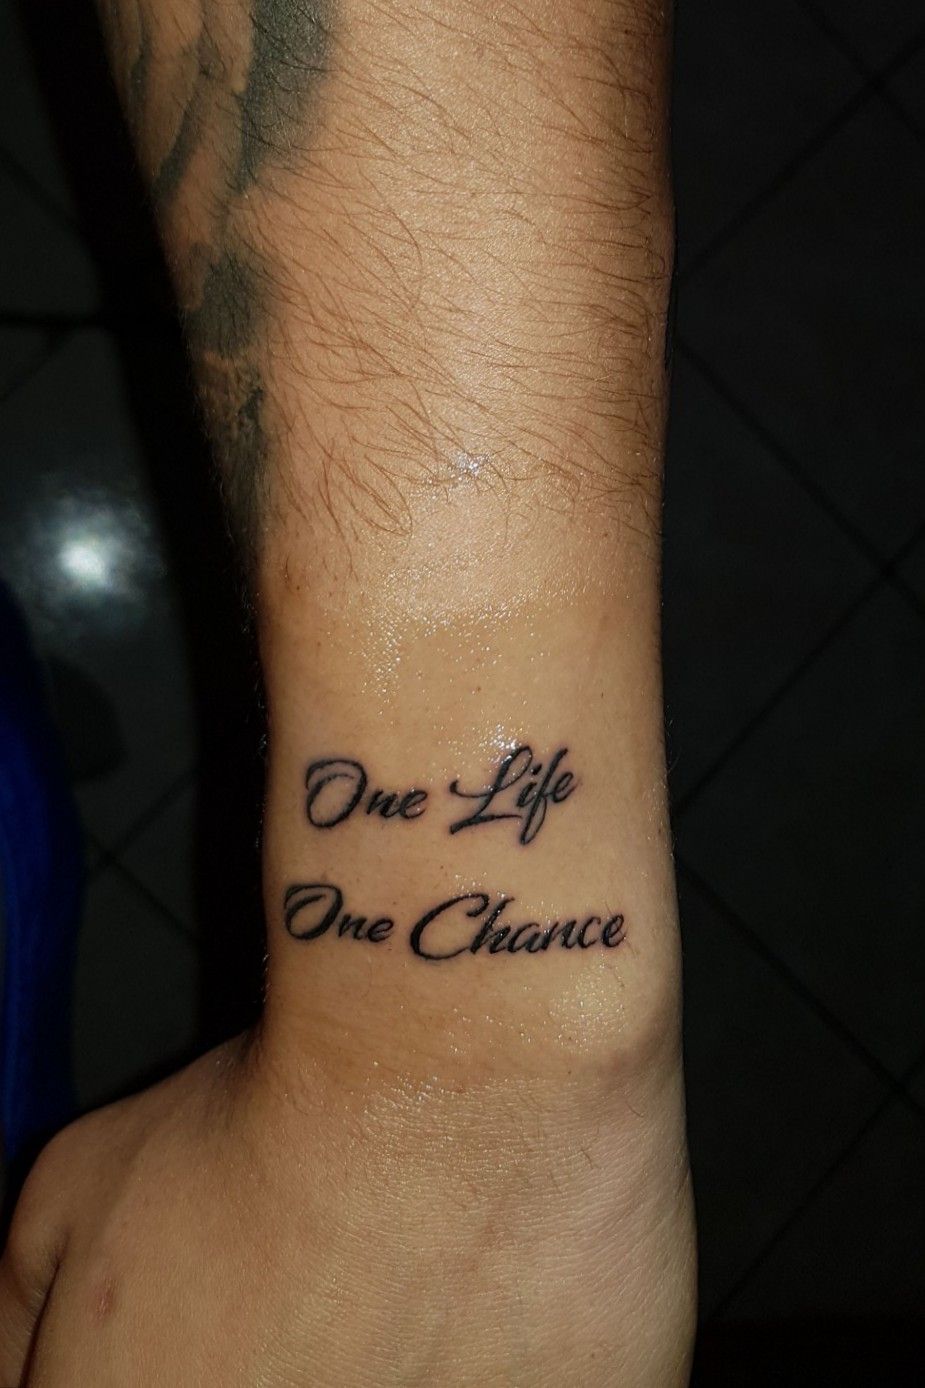 Tattoo uploaded by Diego Bellini • One life, one chance #letteringtattoo  #Black #words • Tattoodo